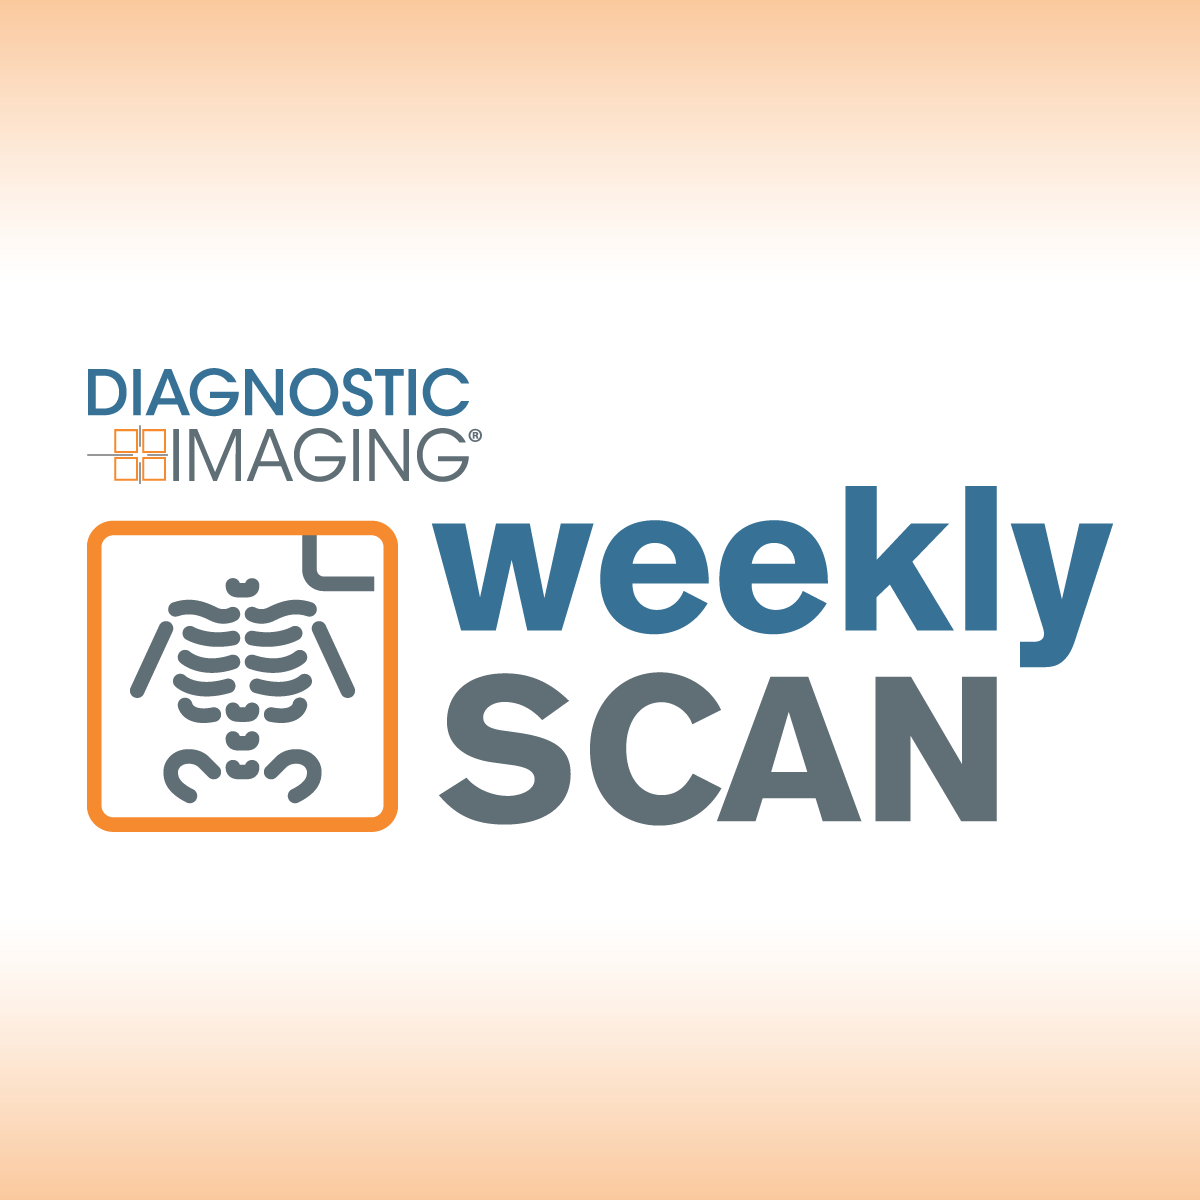 Diagnostic Imaging's Weekly Scan: January 14-January 20